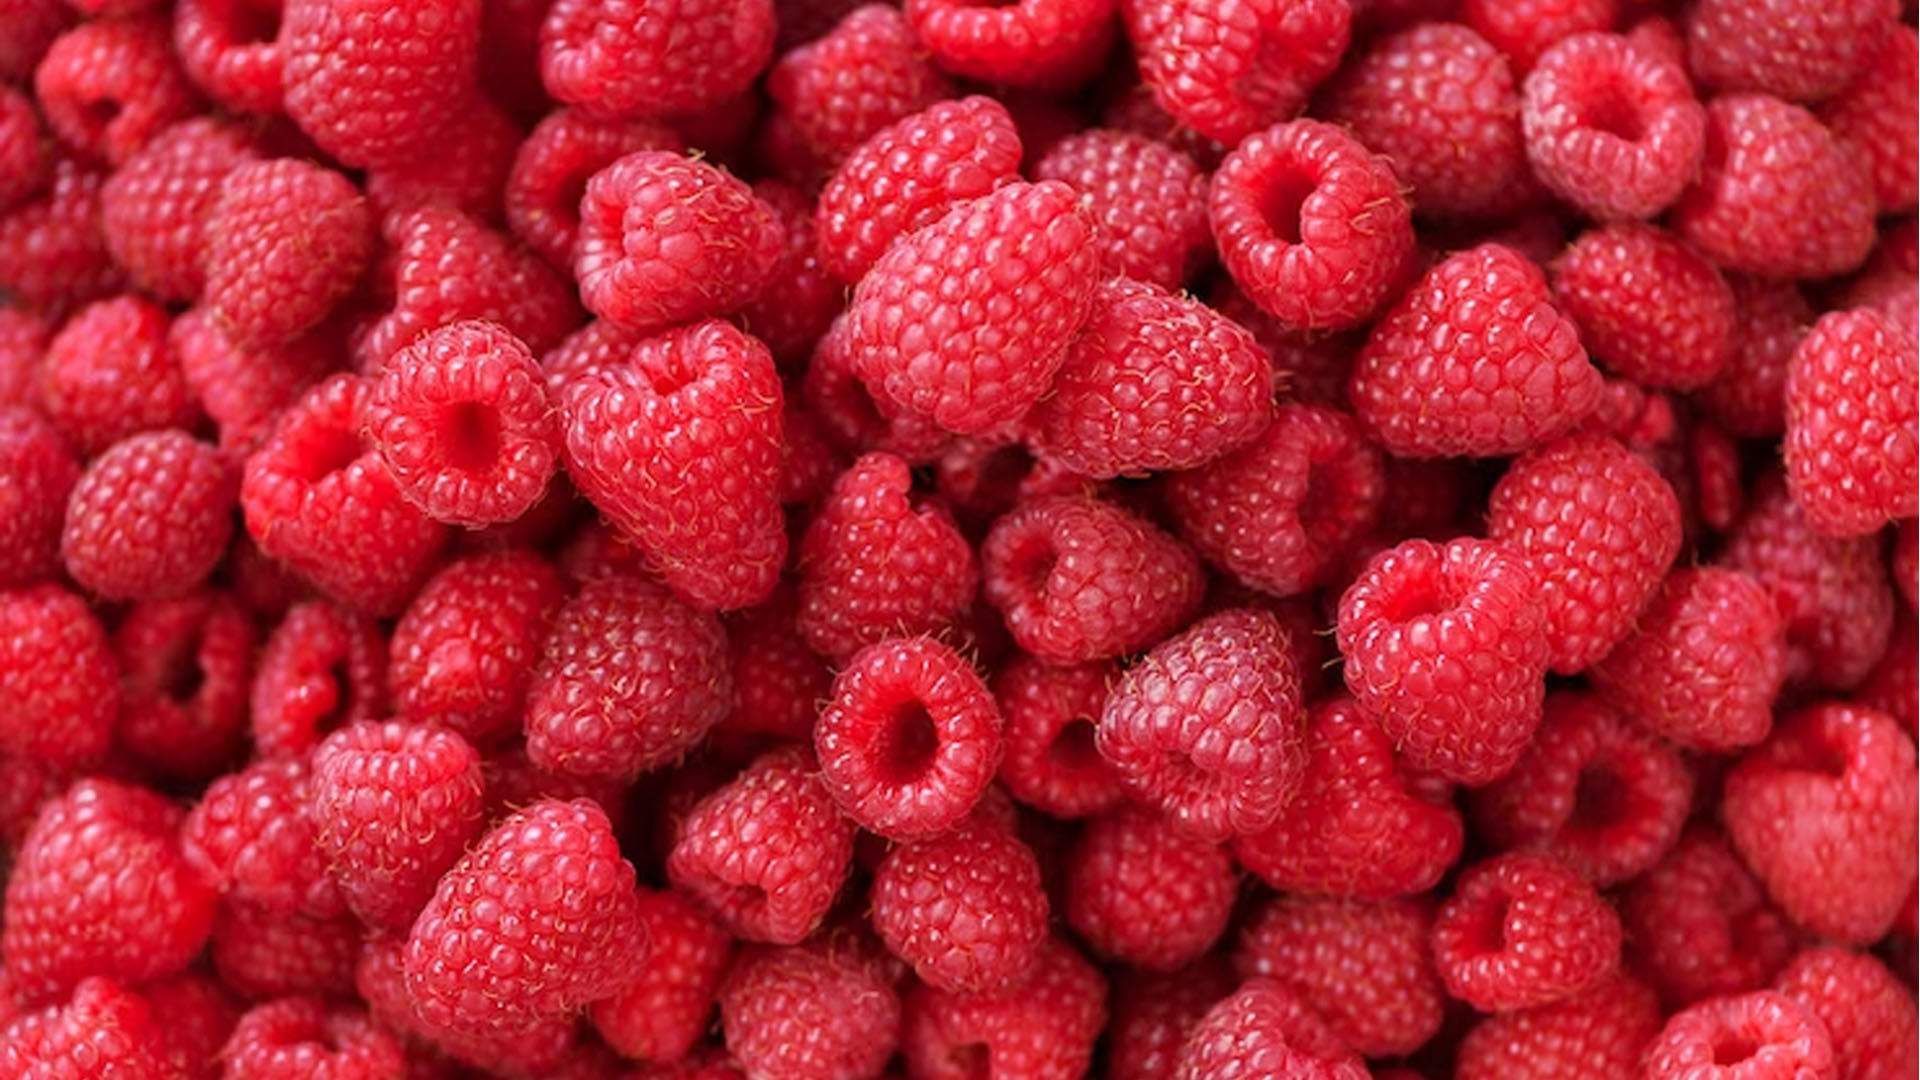 Raspberries: Health Benefits and Nutrition